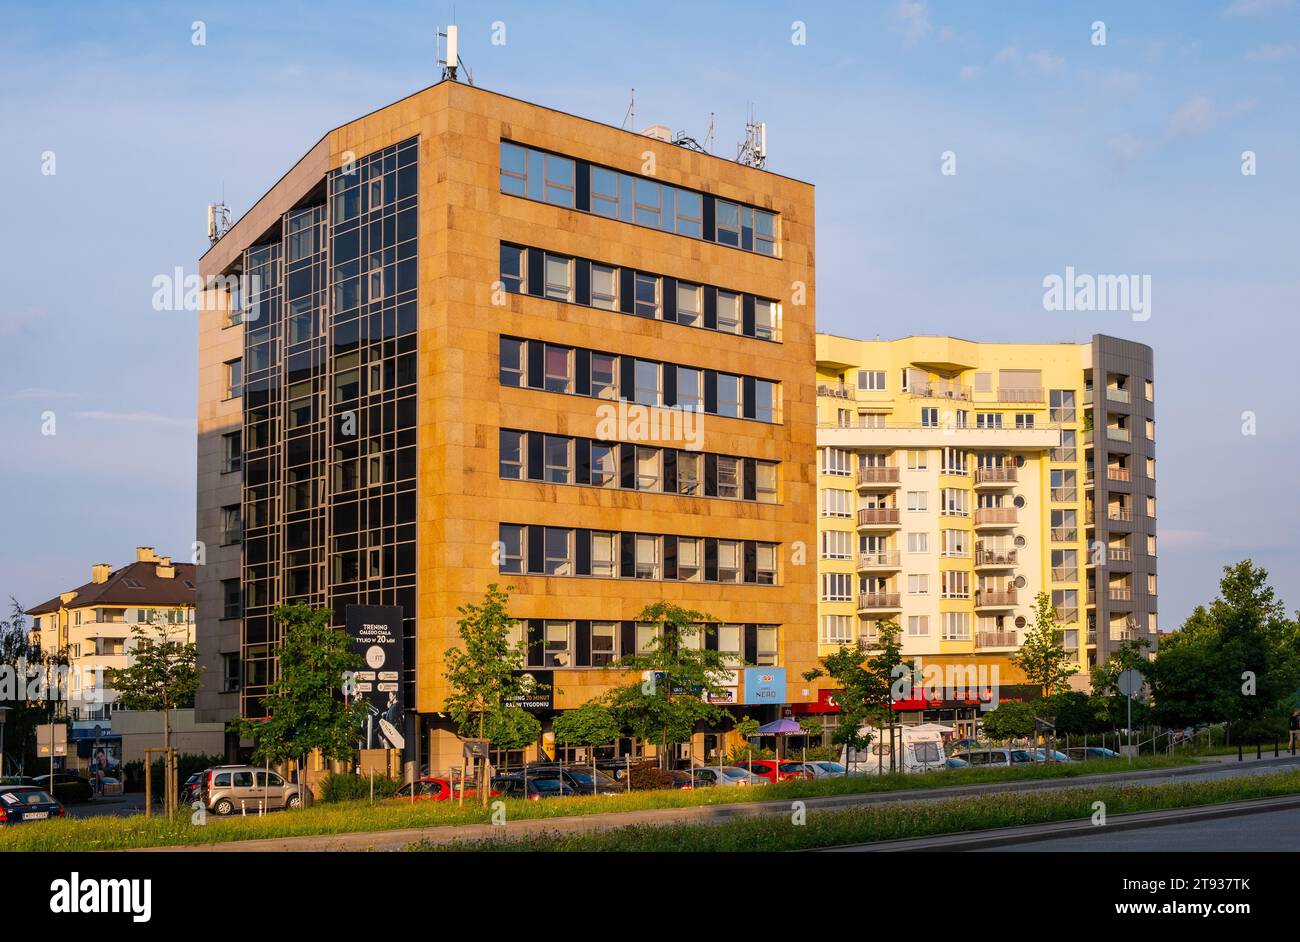 Warsaw, Poland - July 11, 2021: Modern residential buildings aside metro station at KEN and Wawozowa street in Kabaty quarter of Ursynow district Stock Photo